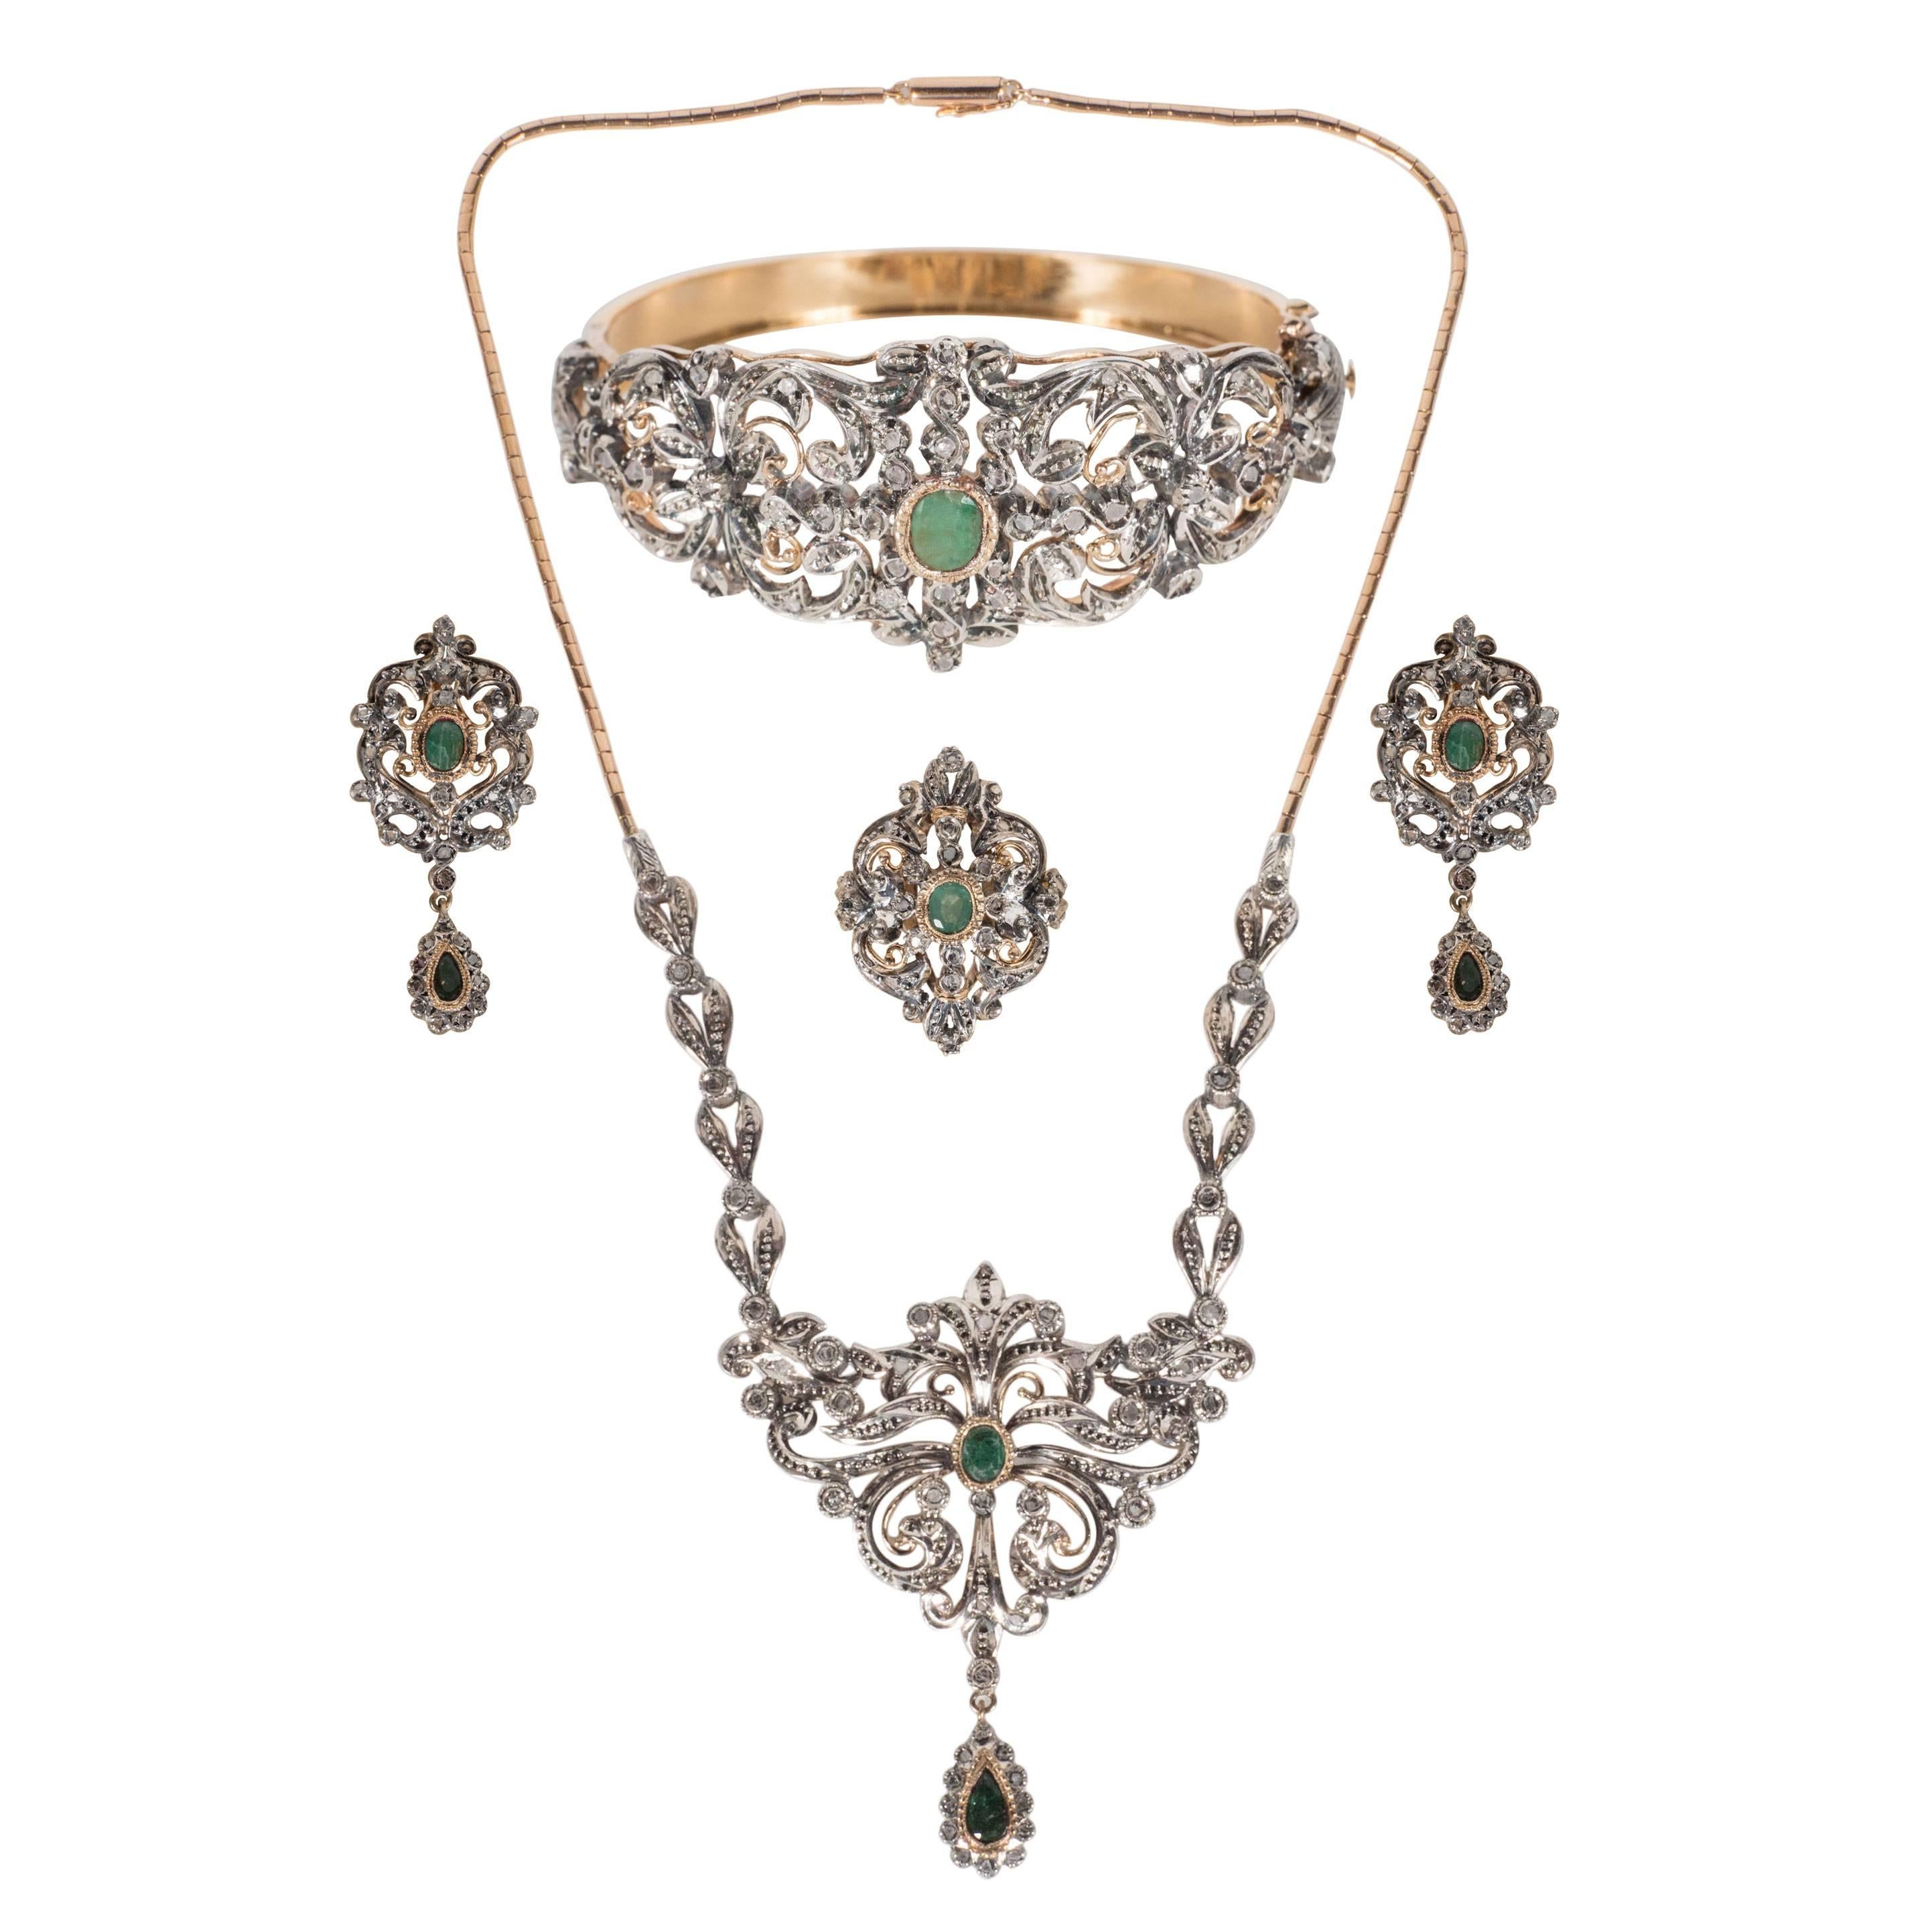 Antique Suite of Jewelry in Diamonds Emeralds Gold and Sterling